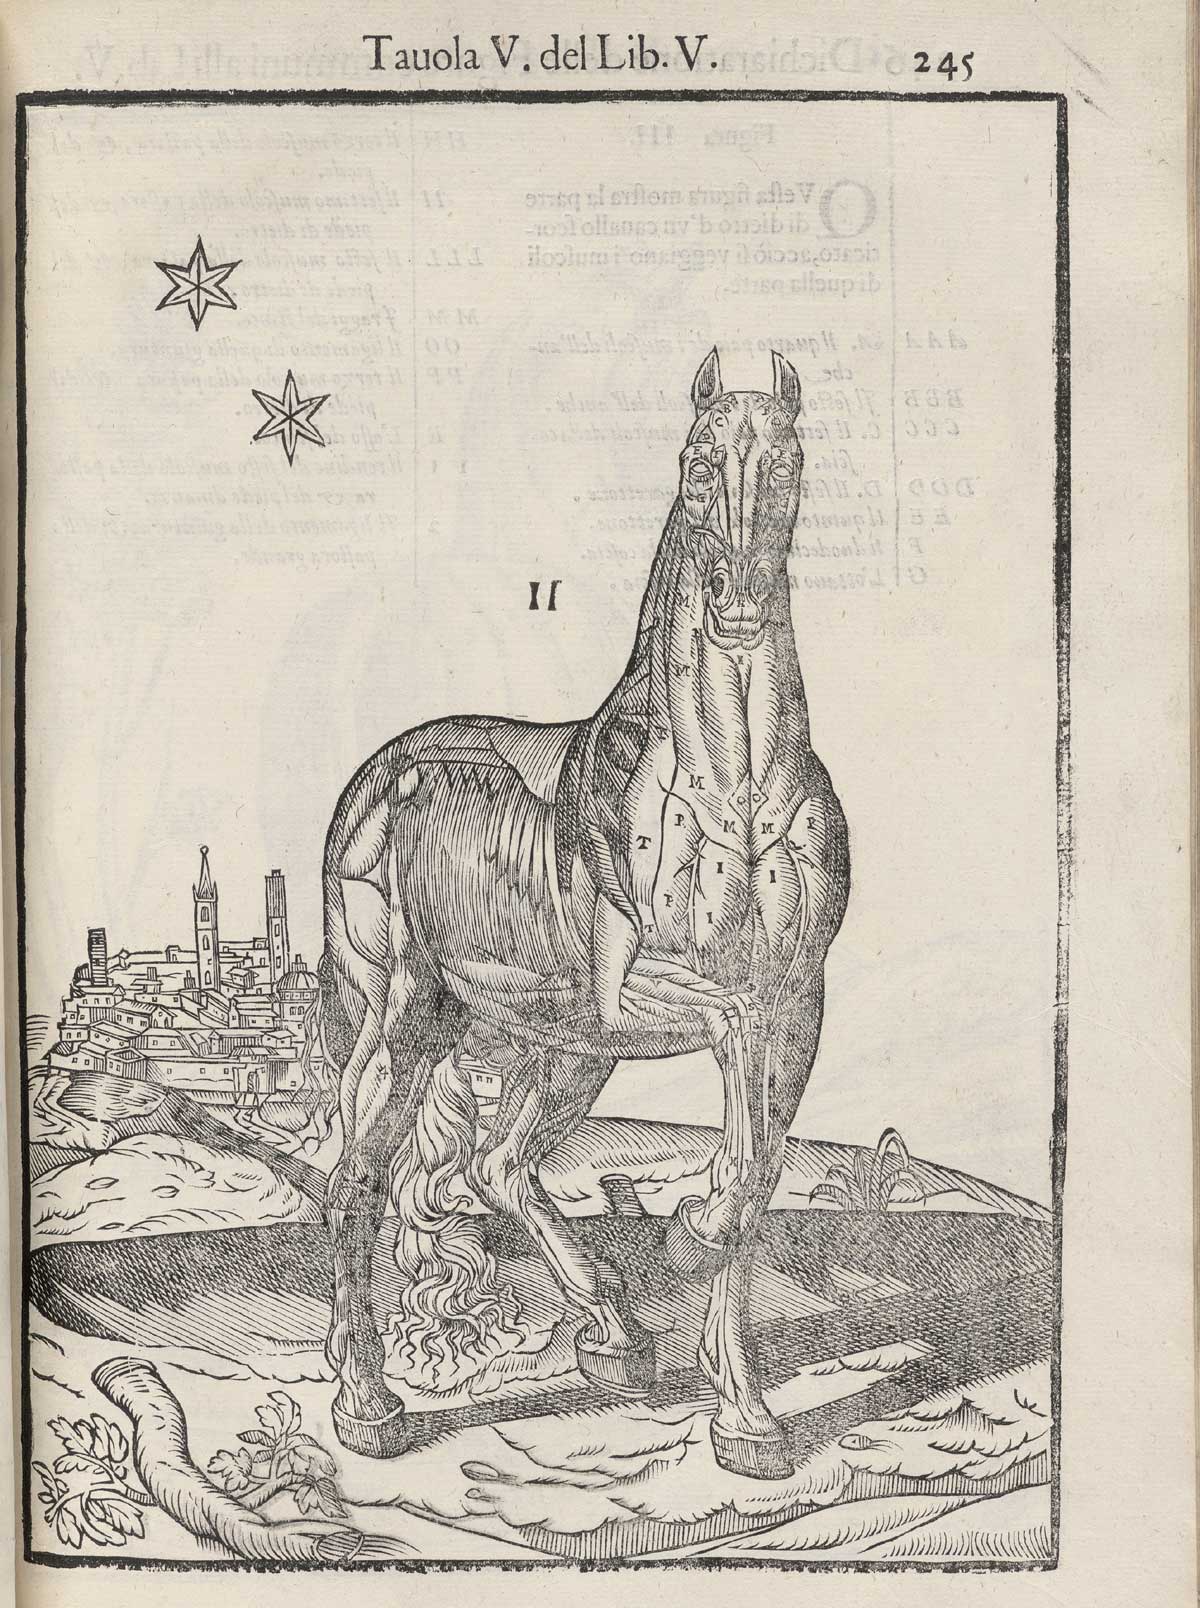 Page 245 of Ruini's Anatomia del cavallo, infermità, et suoi rimedii, featuring the full length frontal view of a flayed horse detailing the muscles.